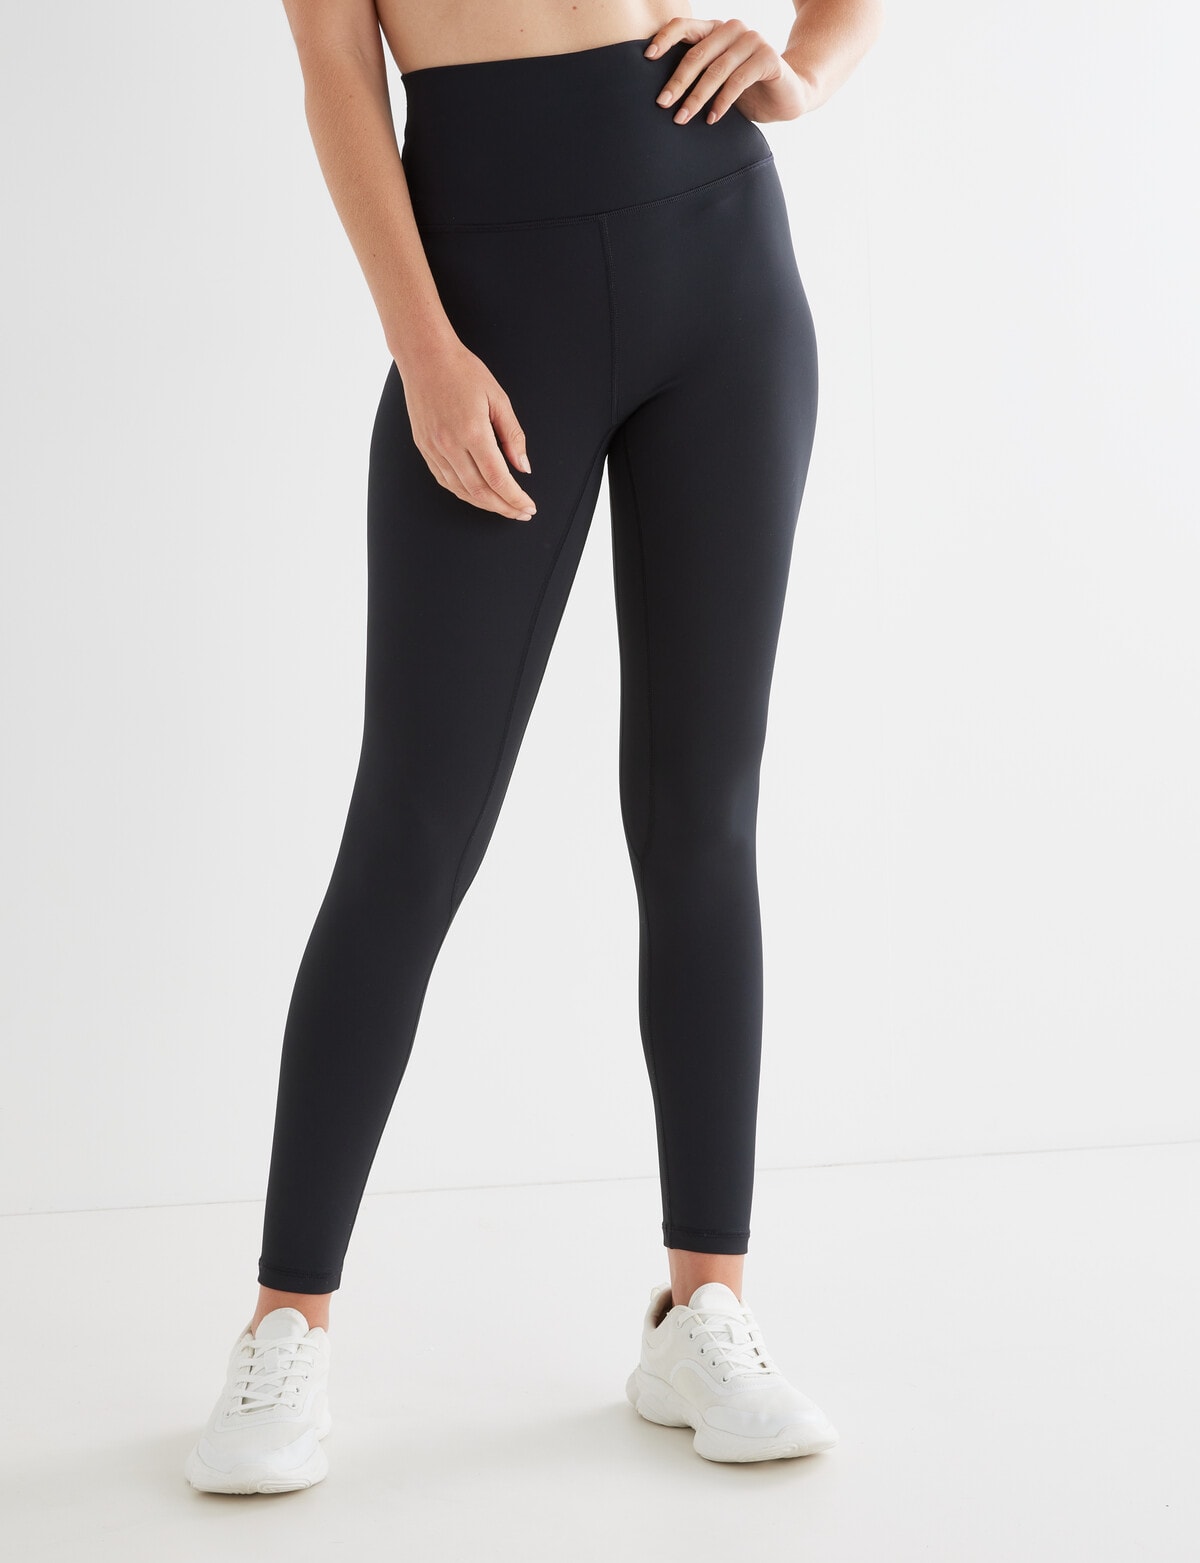 Superfit Curve Crop Active Limitless Legging, Petrol - Womens Red Dot